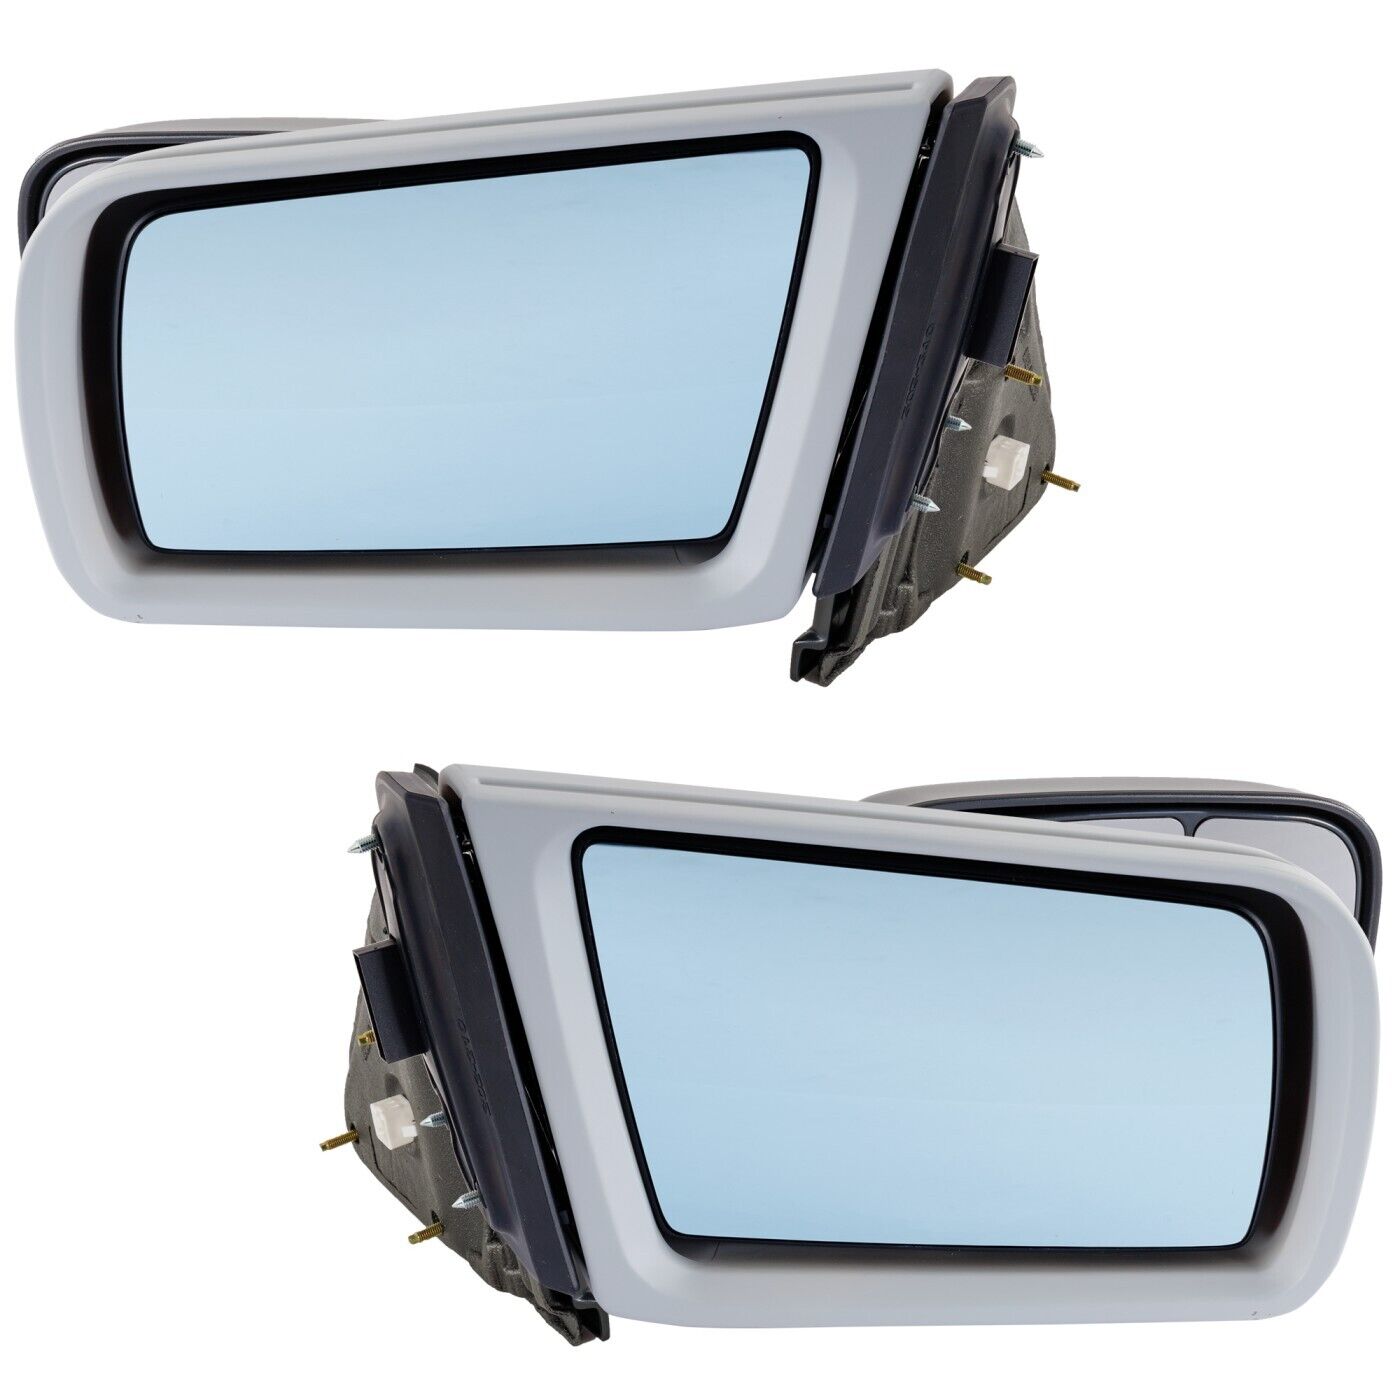 Mirror Set For 1994-2000 Mercedes Benz C280 Heated Manual Folding Left and Right